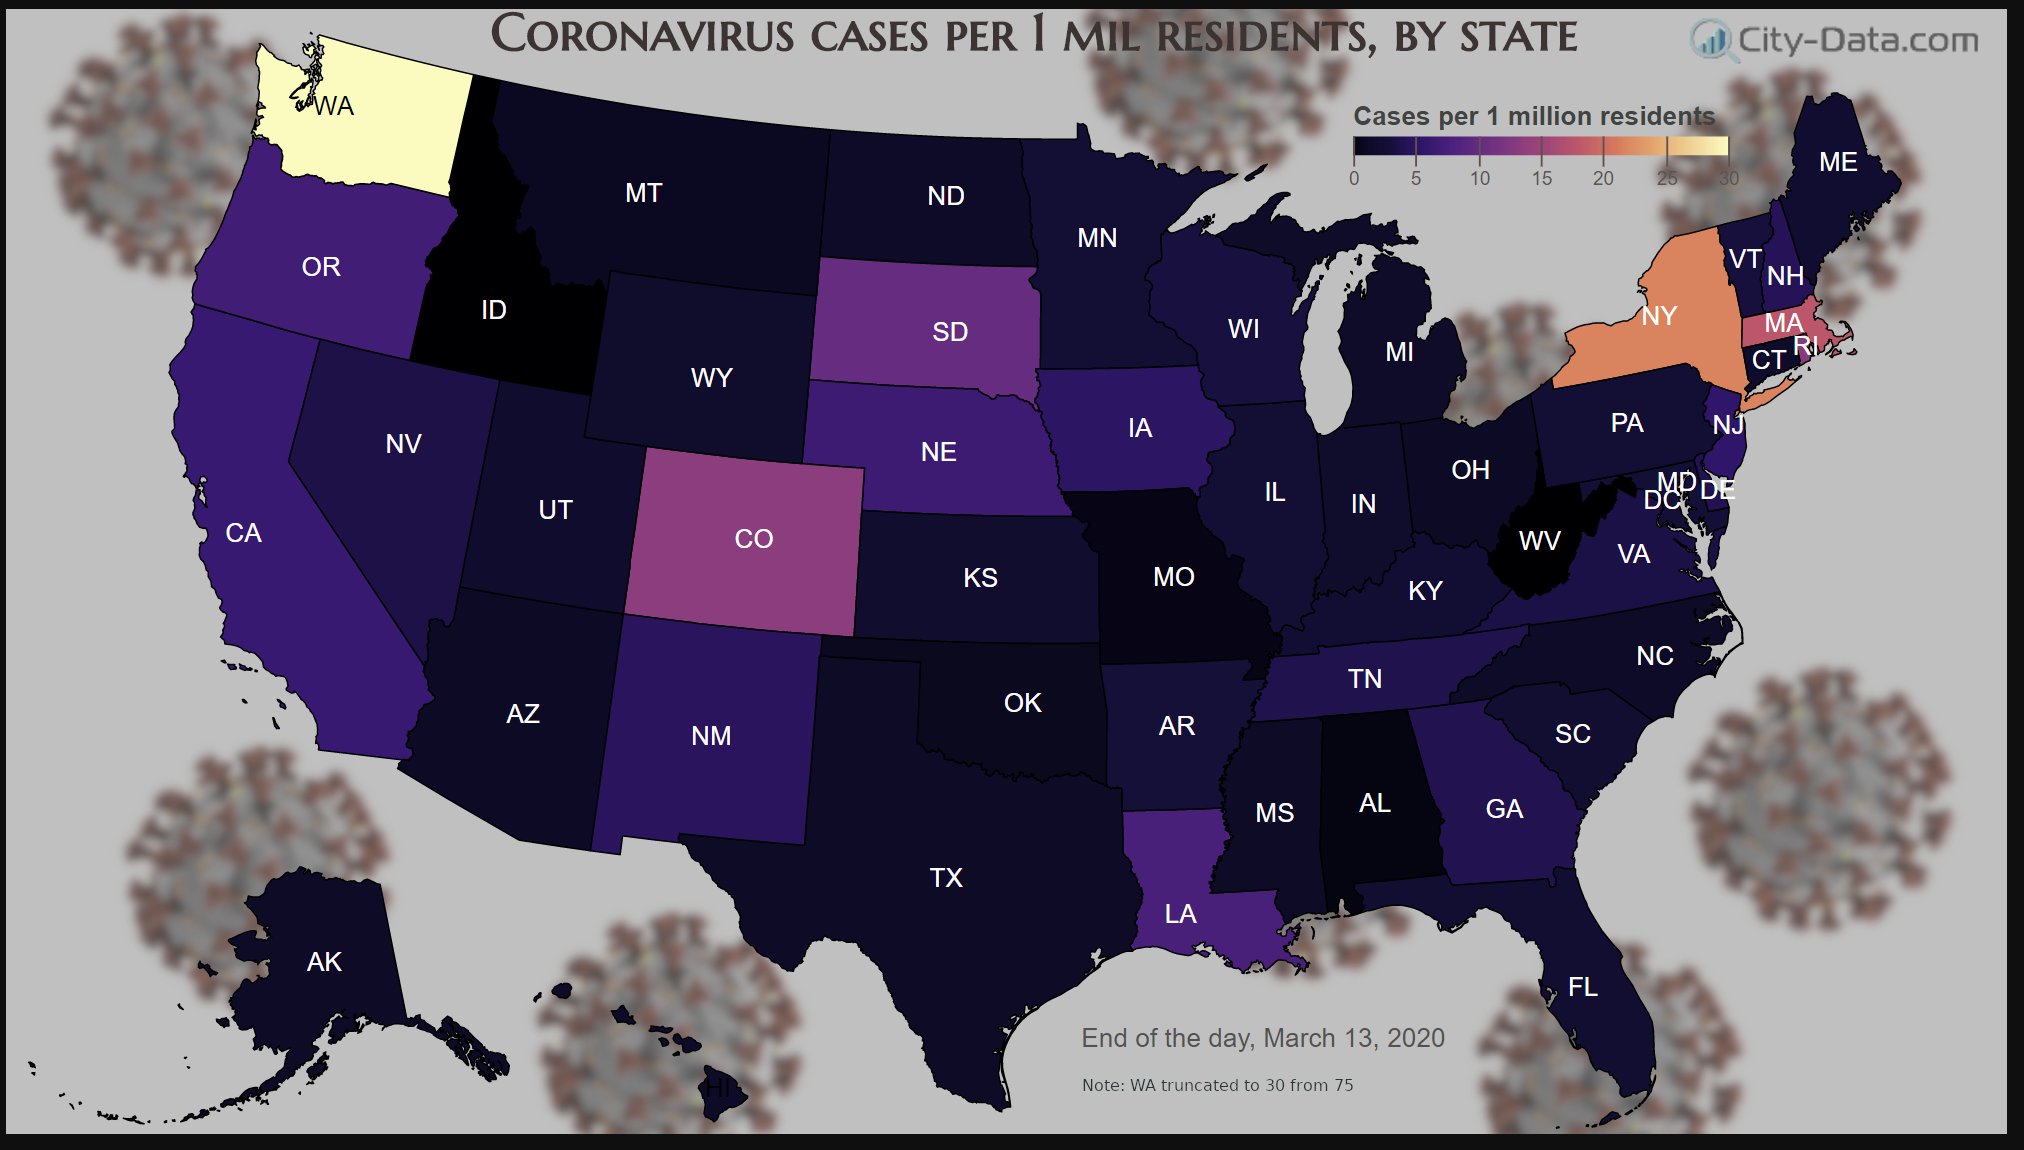 Coronavirus (COVID-19) cases per 1 million residents by state